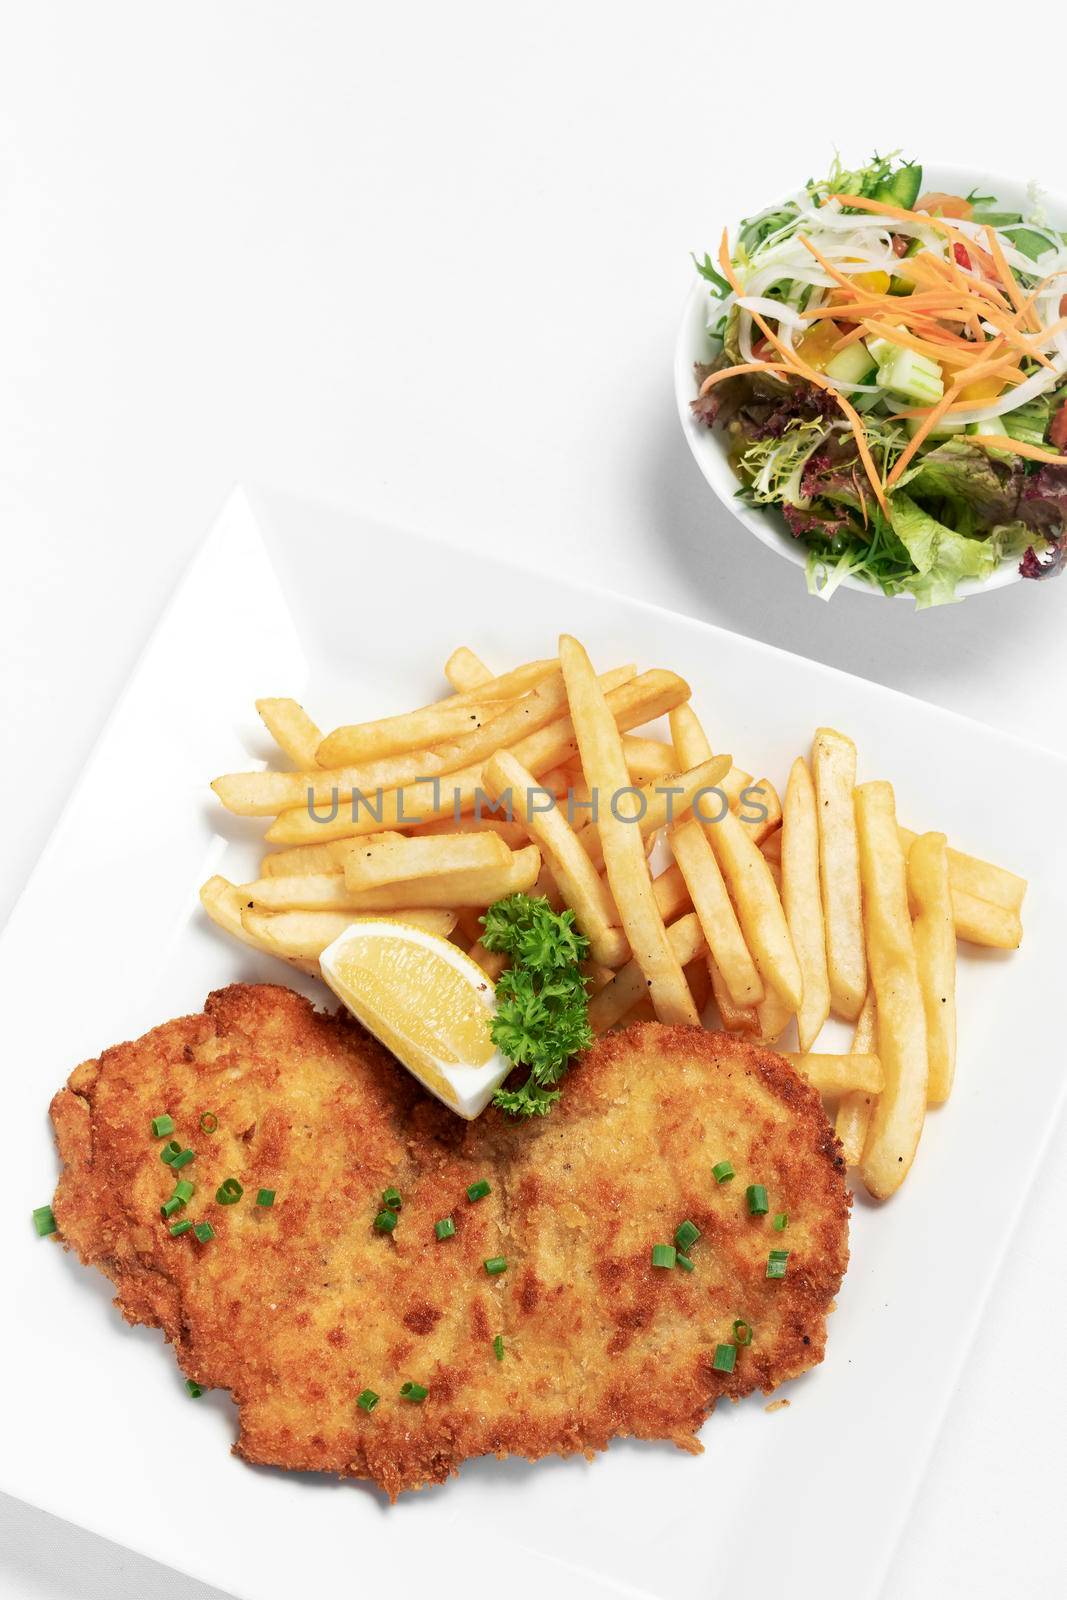 german breaded pork schnitzel with french fries on white studio background